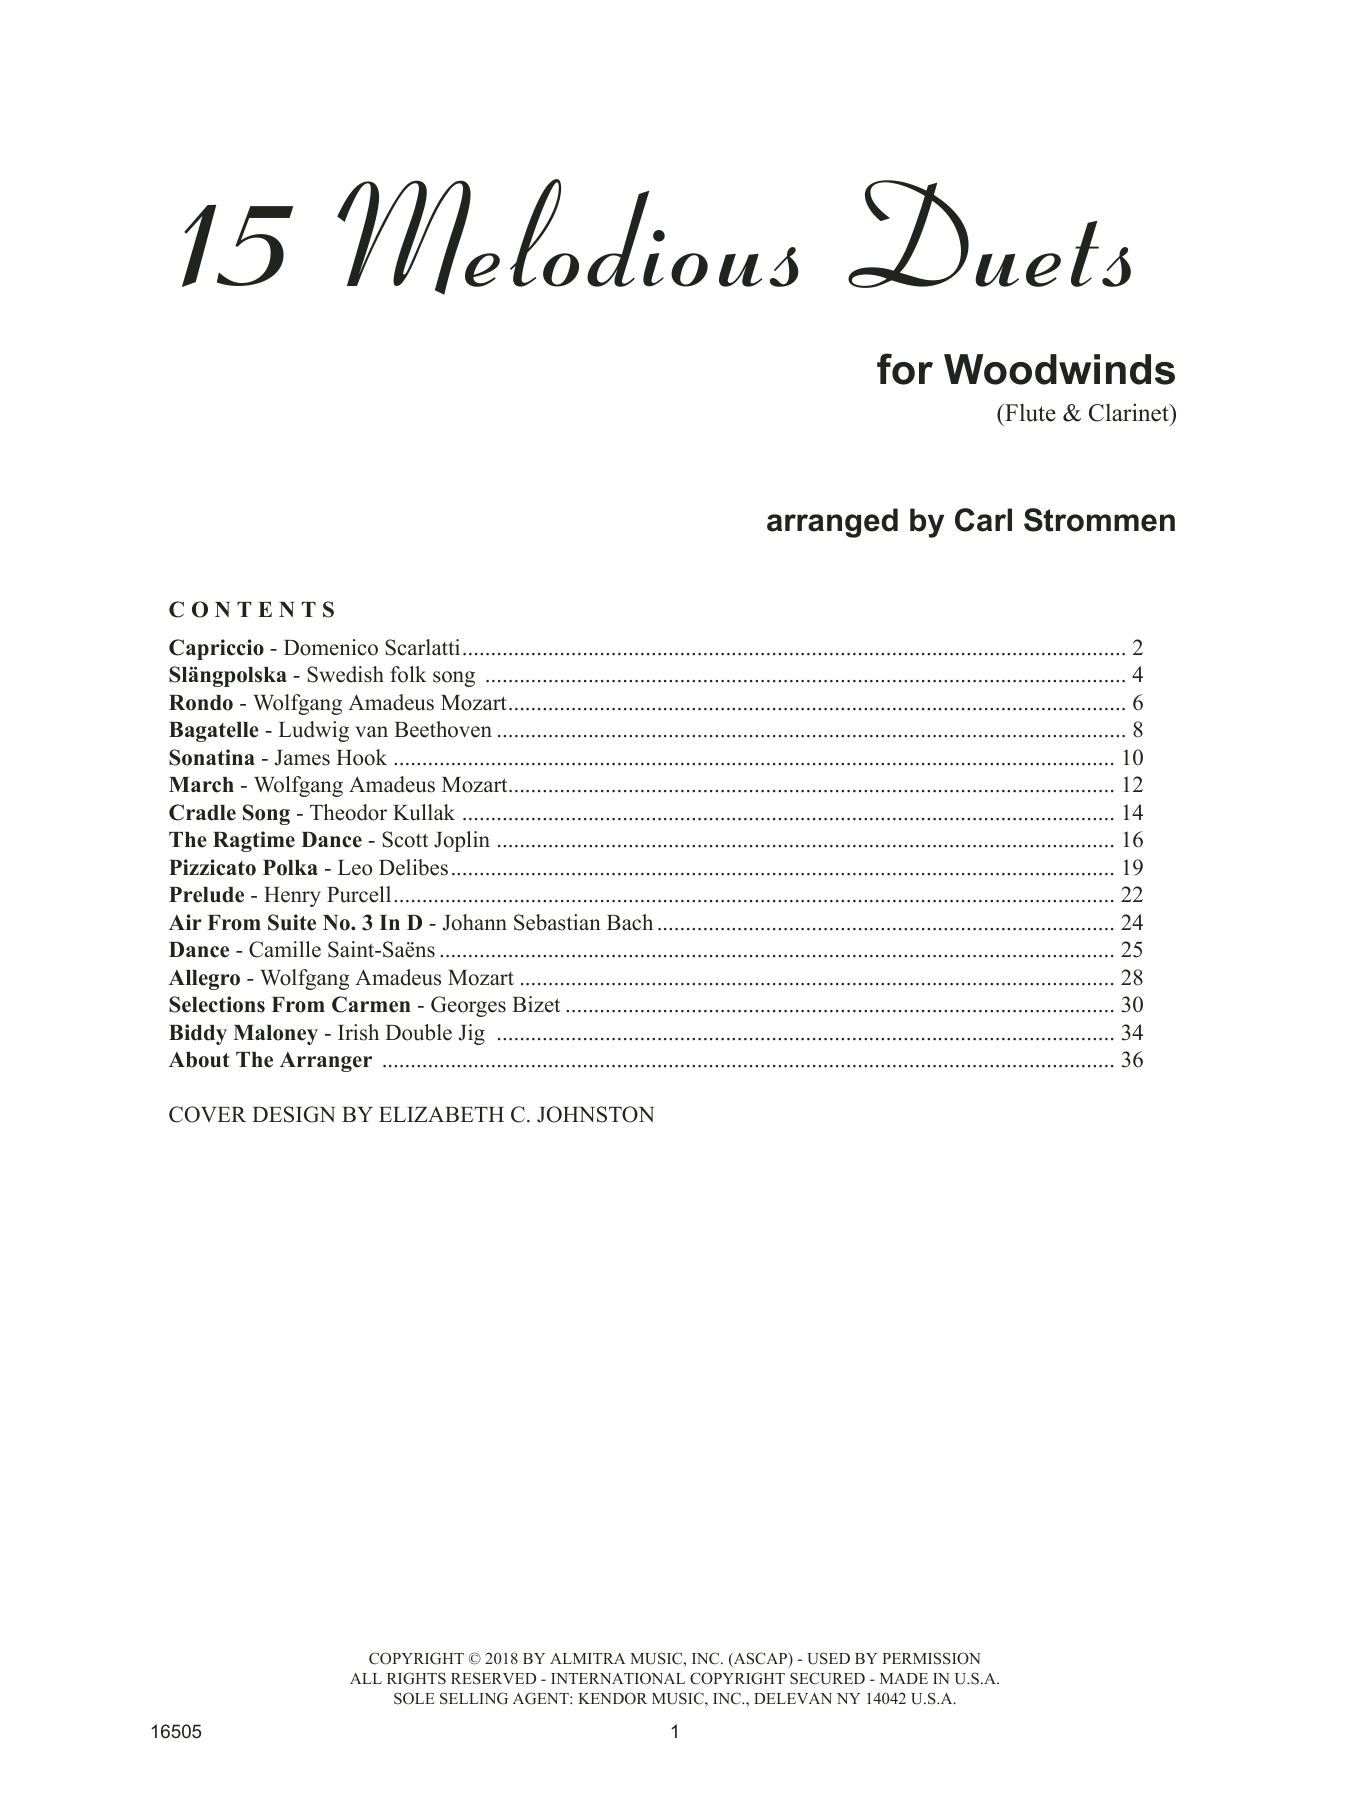 Download Carl Strommen 15 Melodious Duets Sheet Music